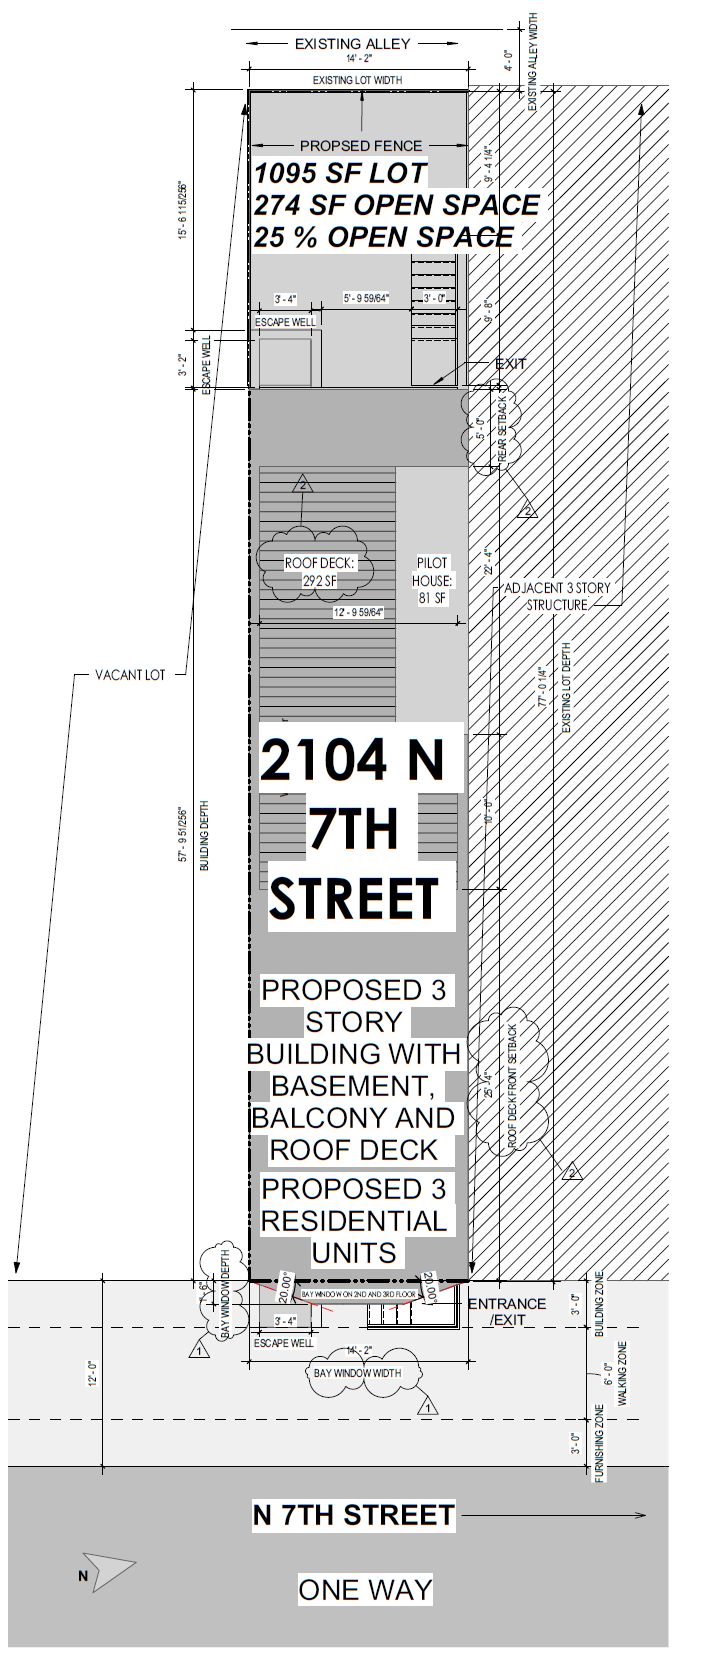 2104 North 7th Street. Site plan. Credit: Sanbar Design via the Department of Planning and Development of the City of Philadelphia